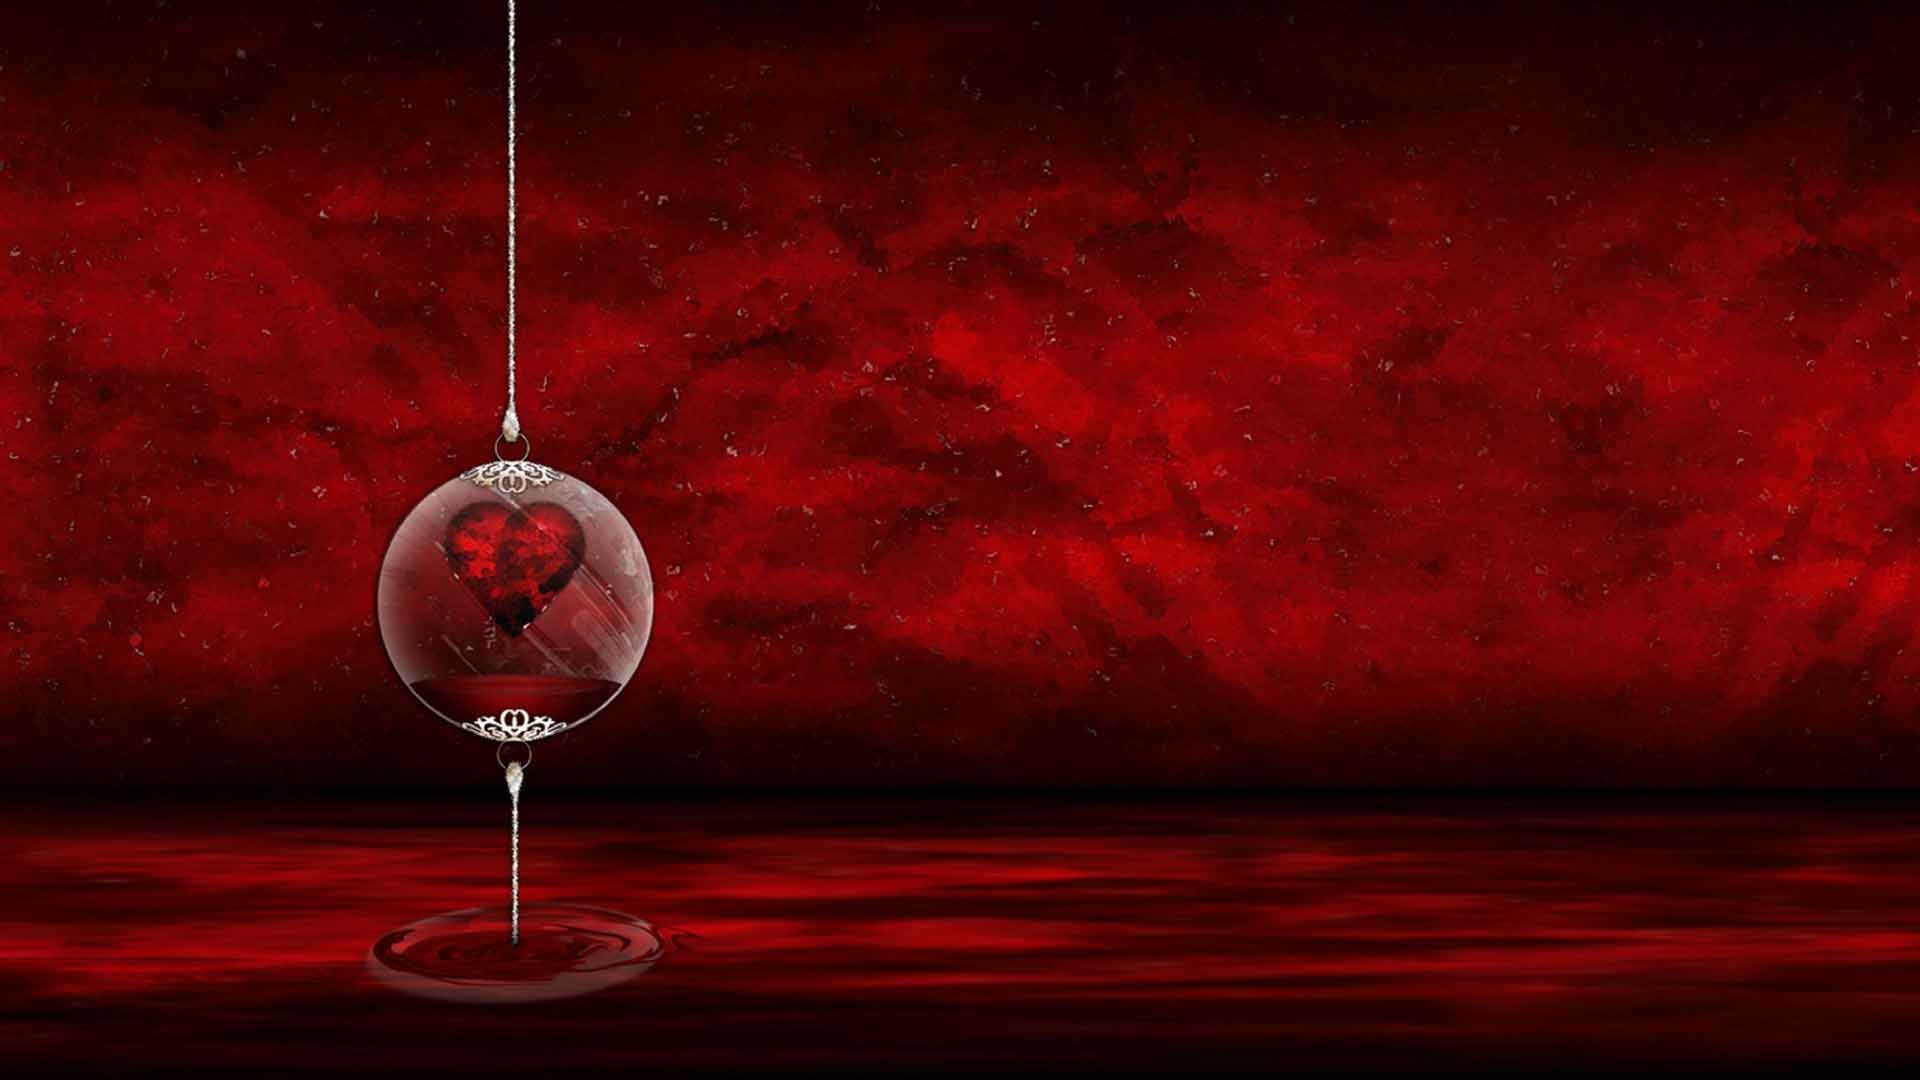 1920x1080 Red bloody heart widescreen 1080p wide love pictures